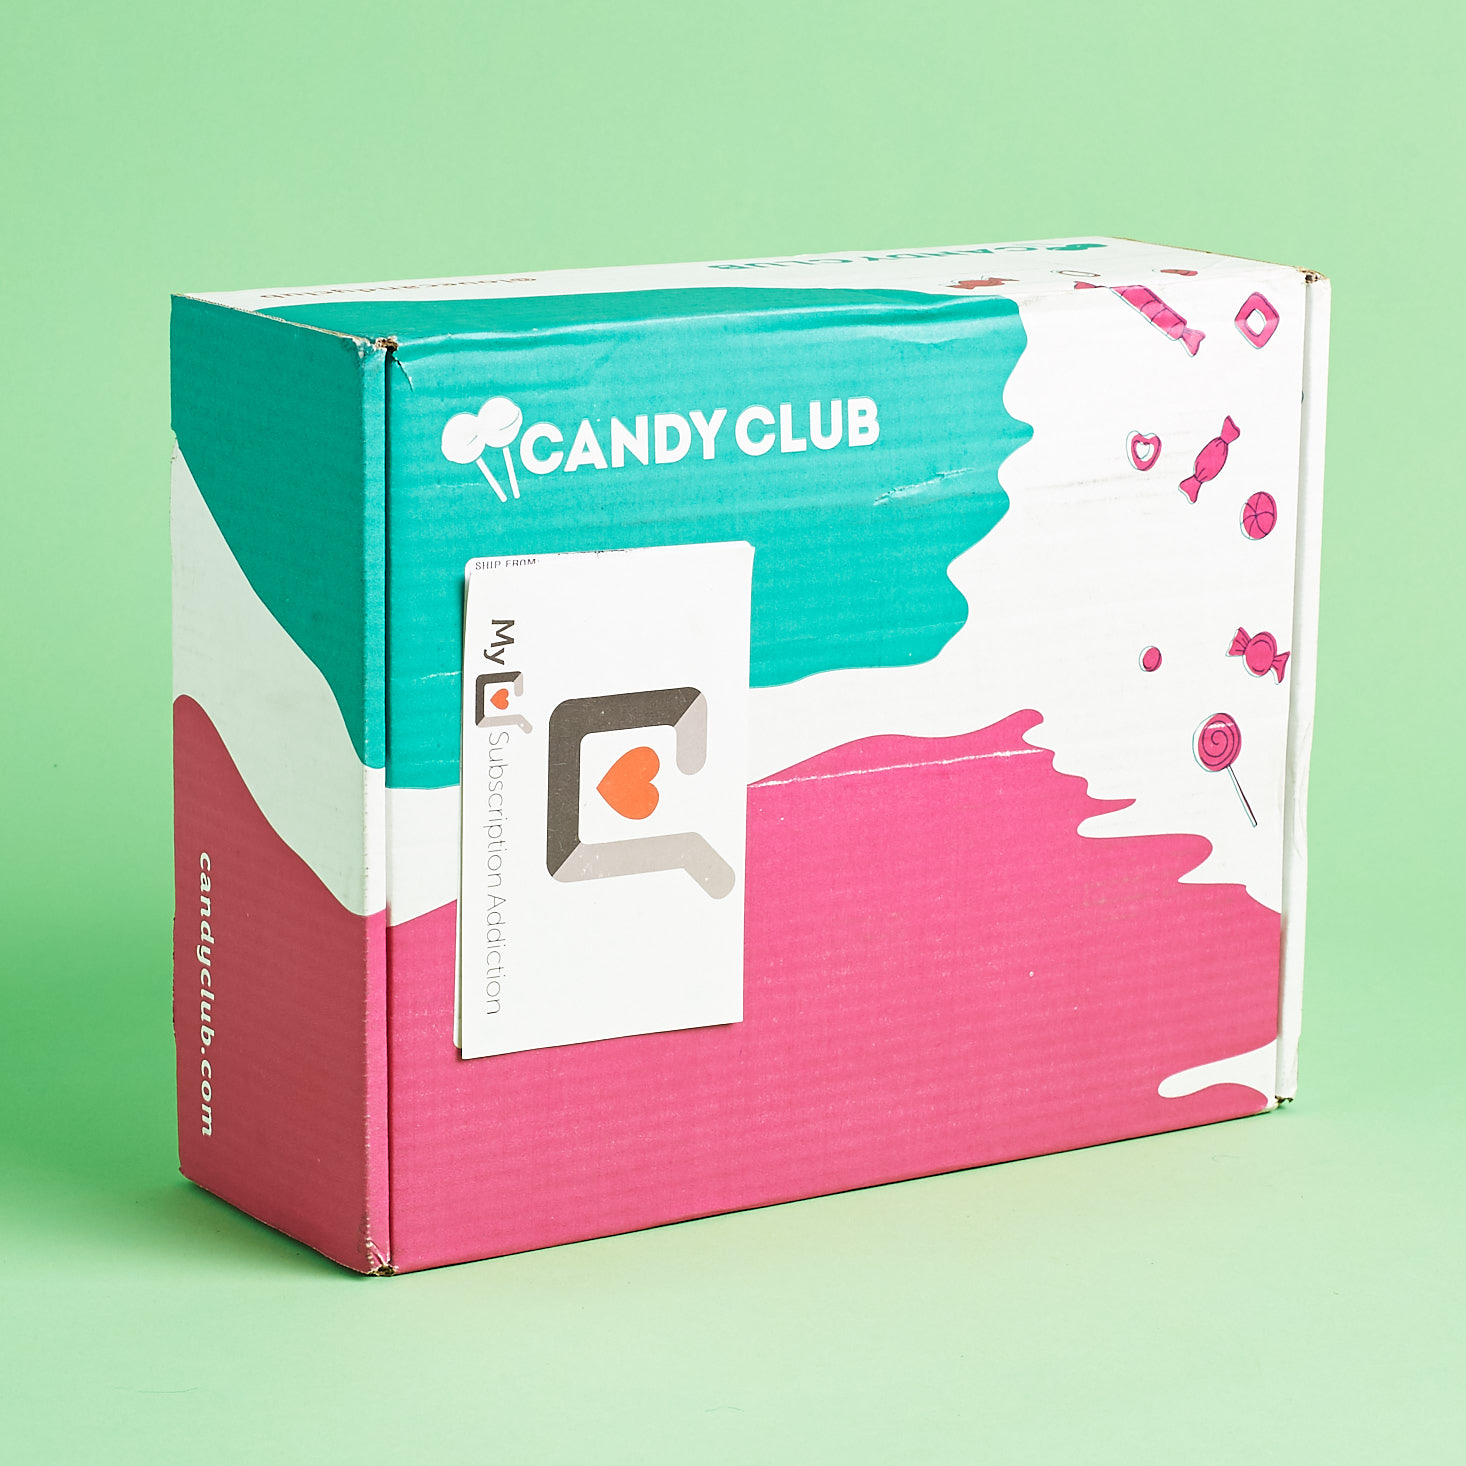 Candy Club Subscription Review – April 2019